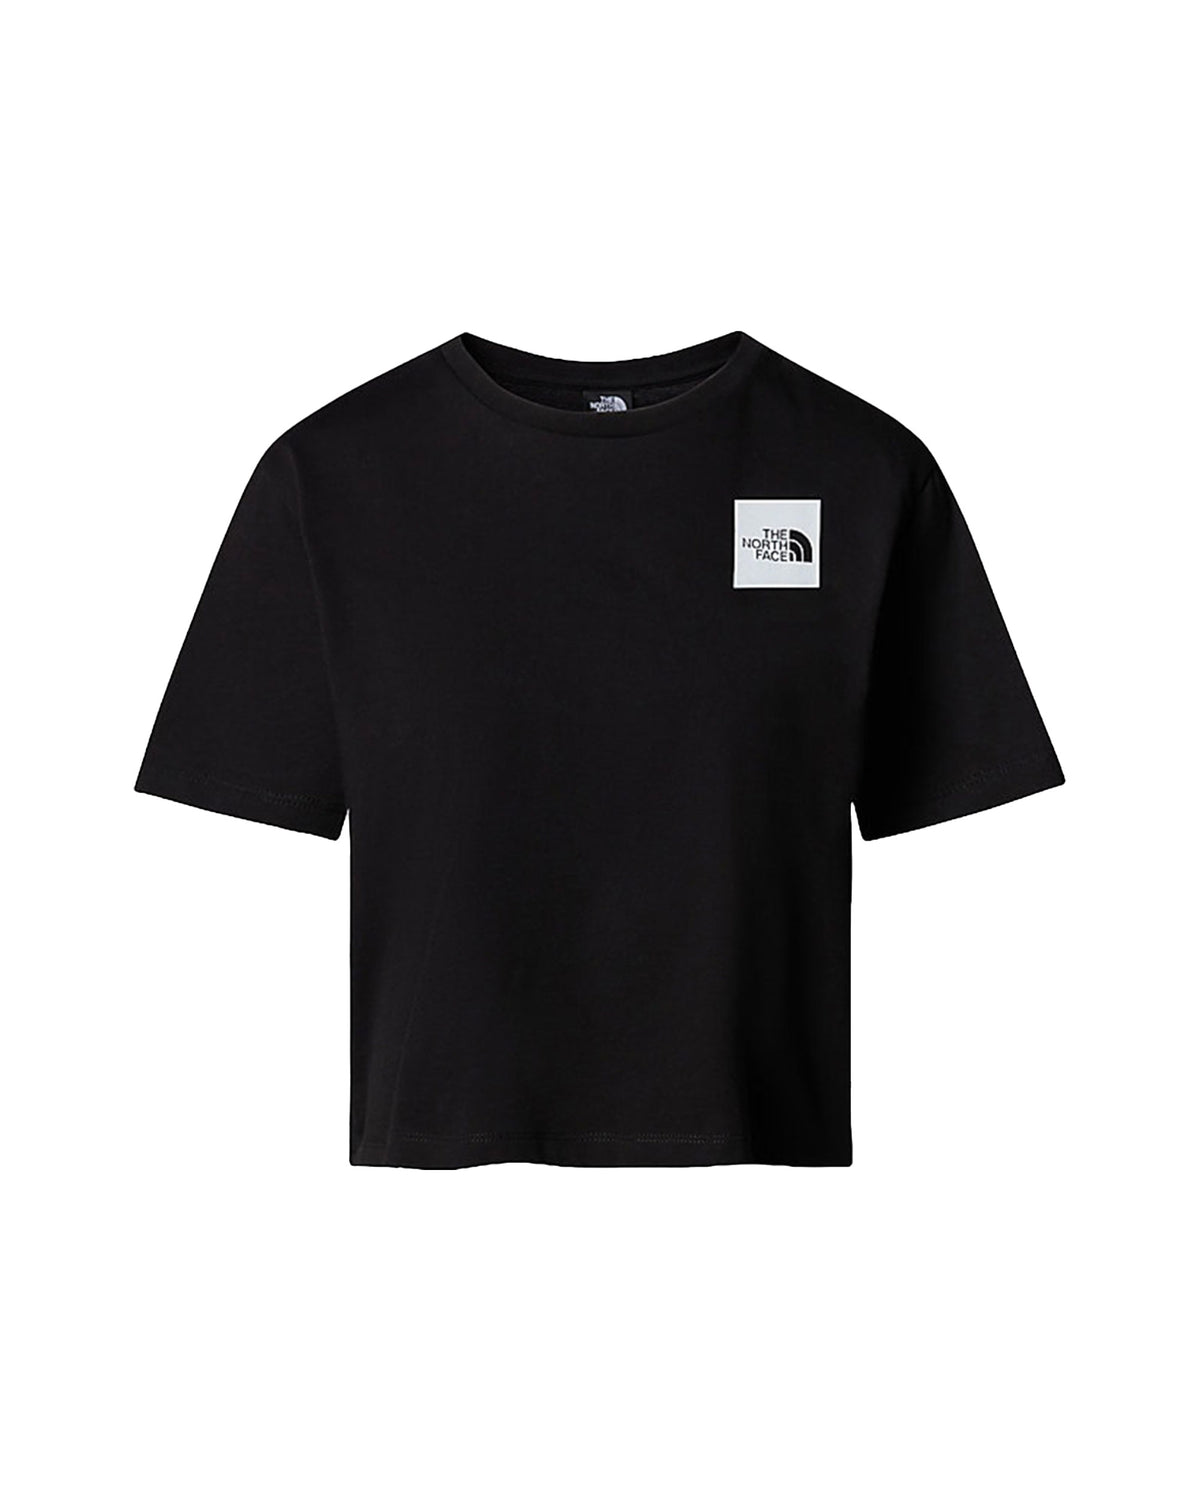 Woman's Tee The North Face Cropped Fine Black